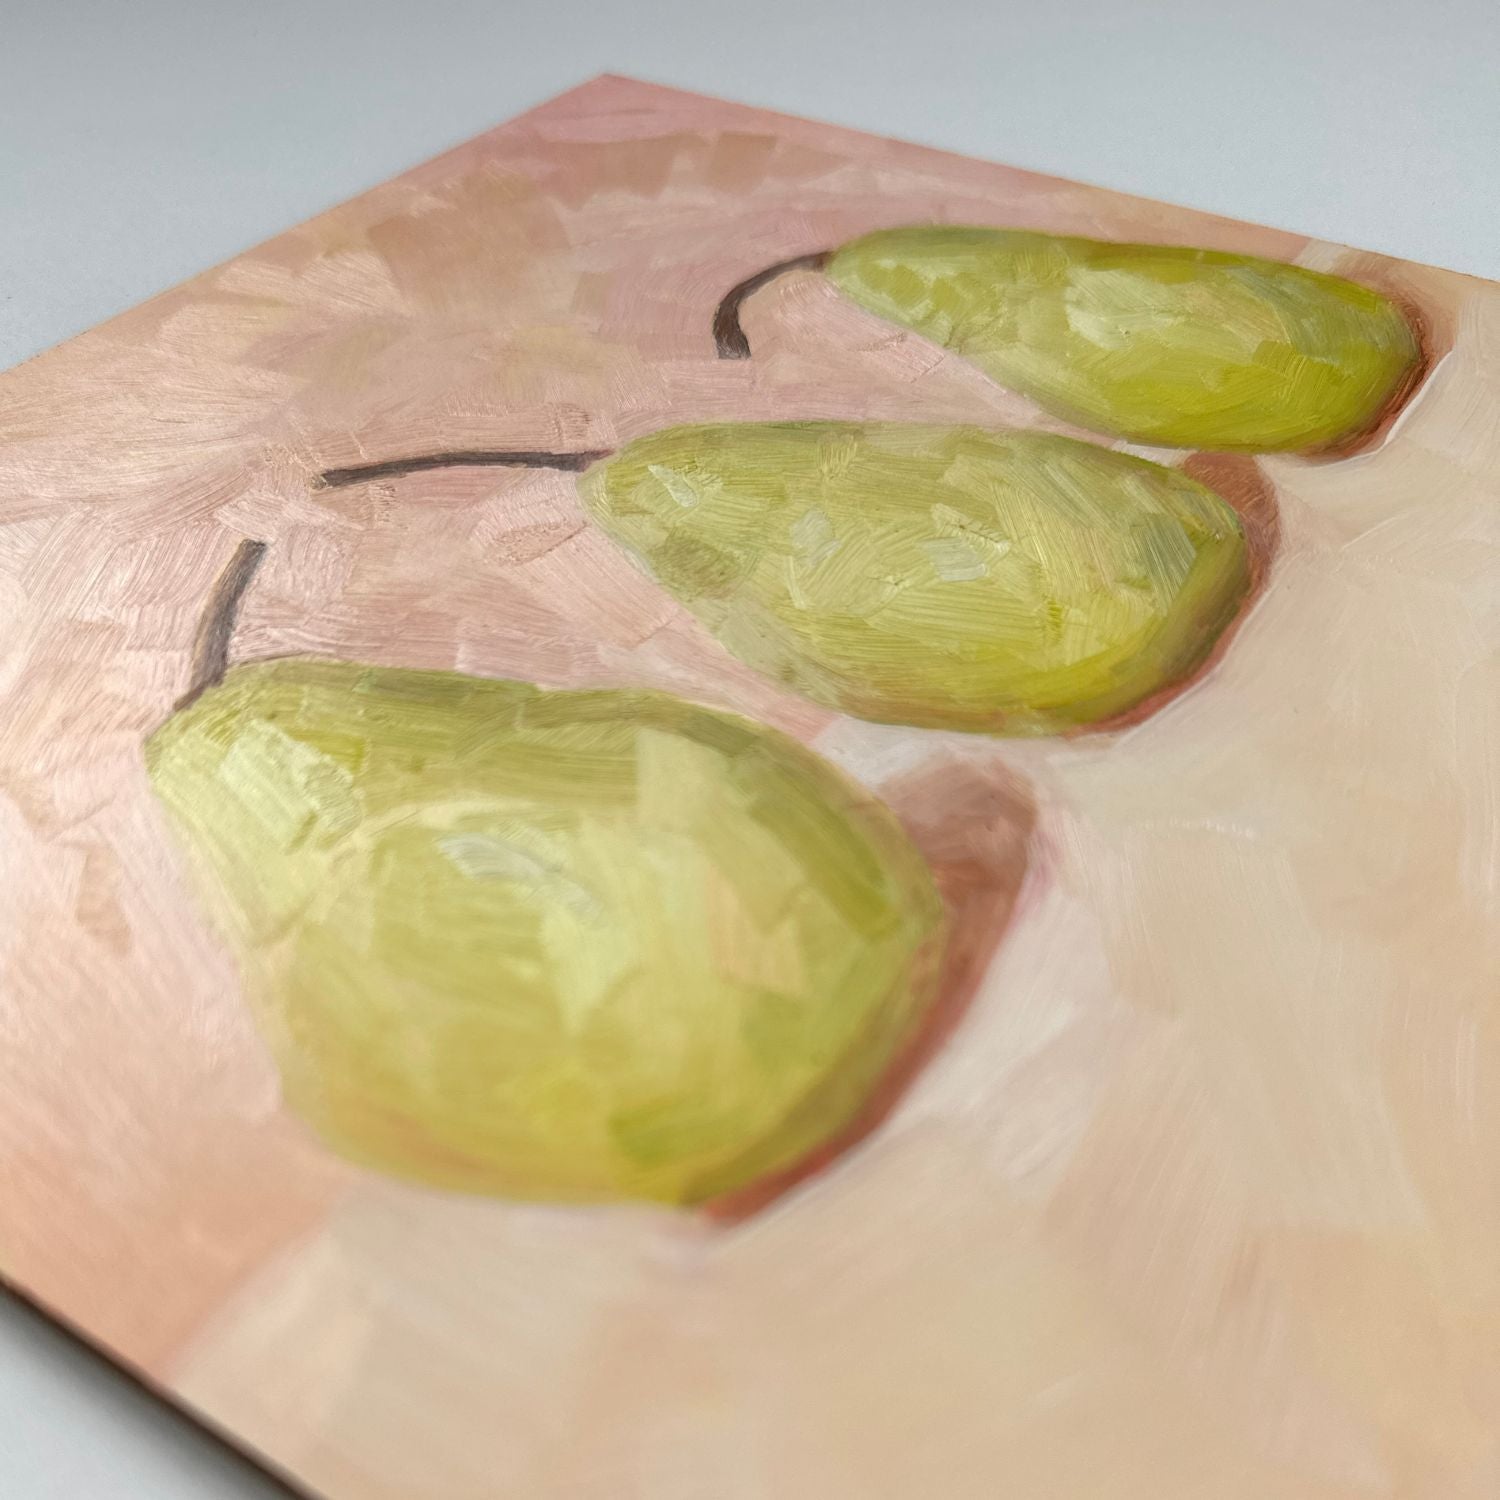 modern and contemporary oil painting of three soft green pears on a soft peach and cream background